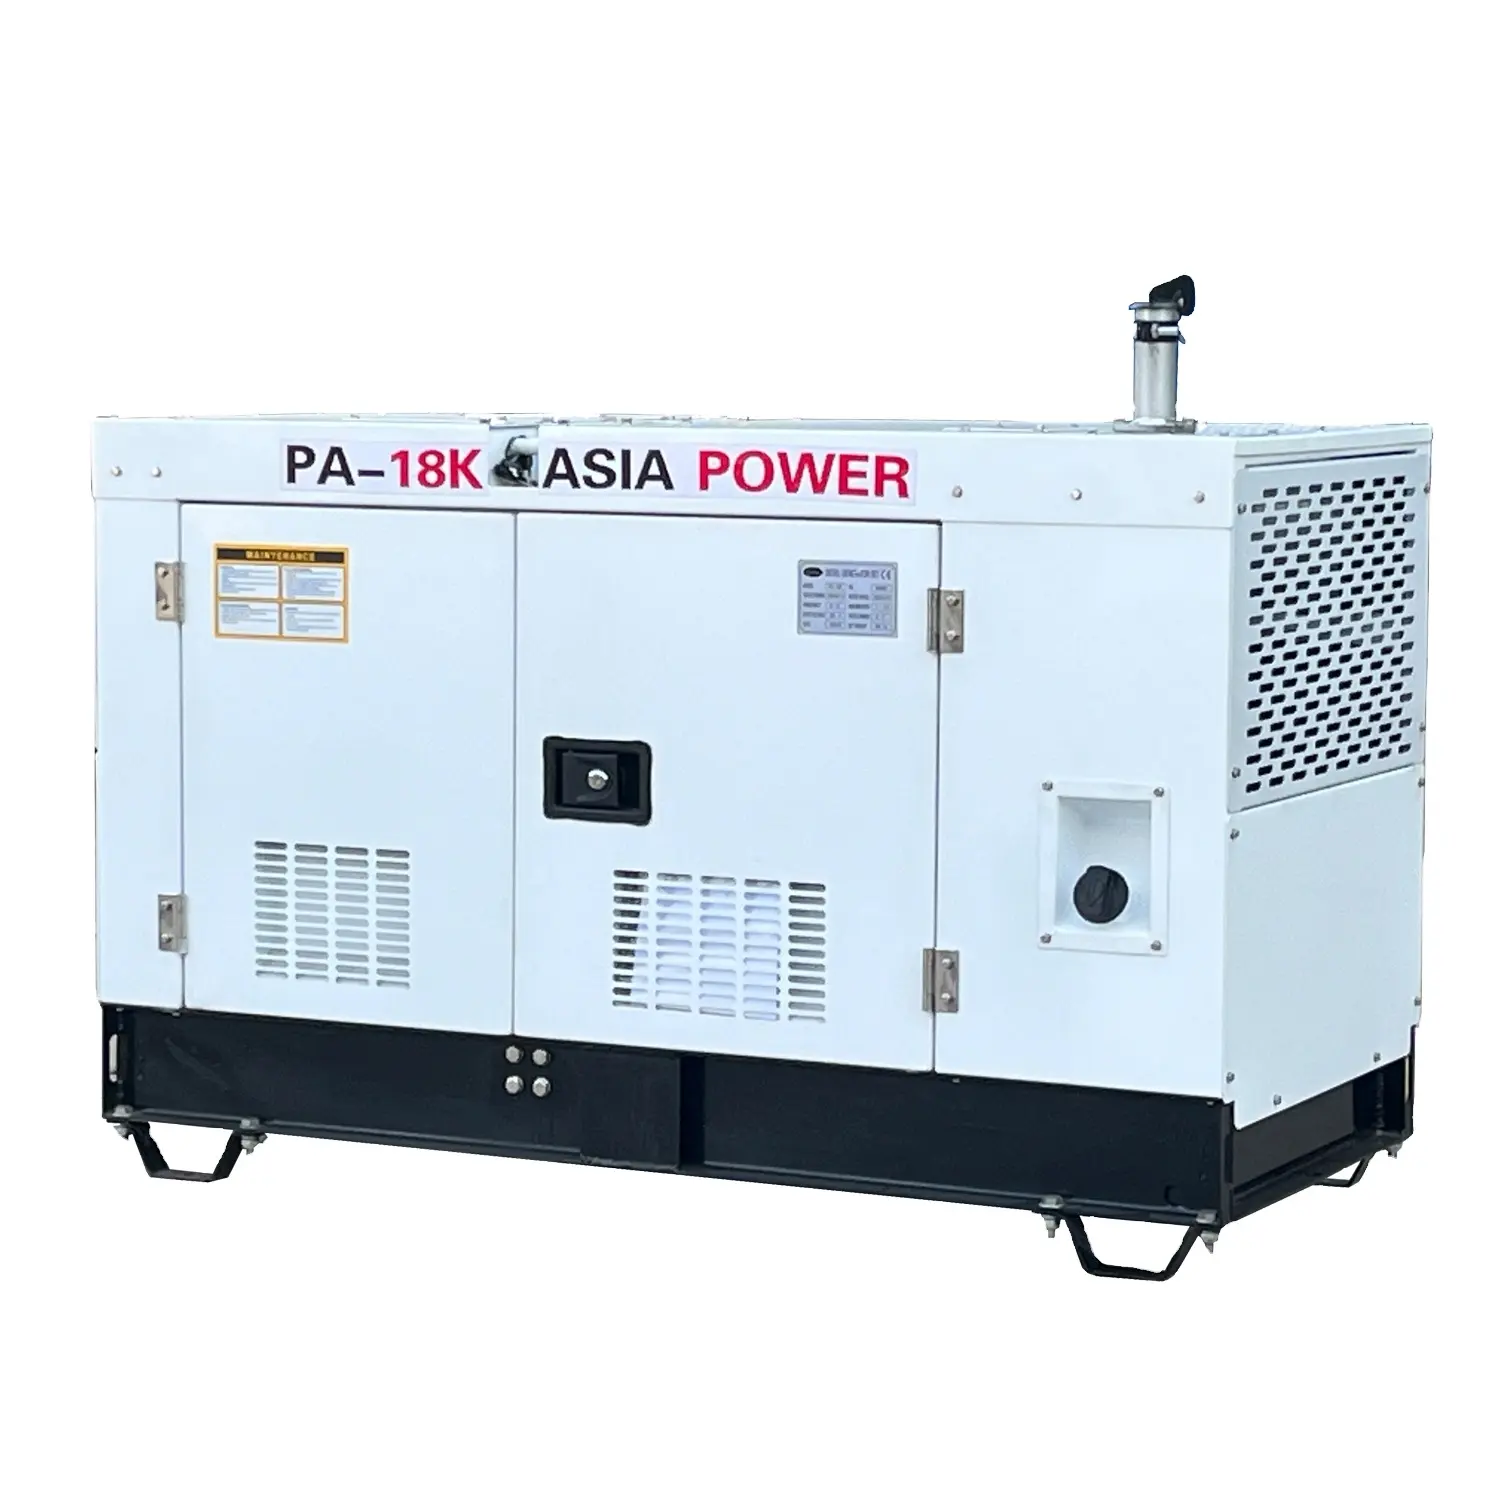 Used for Perkins Power Silent Generator